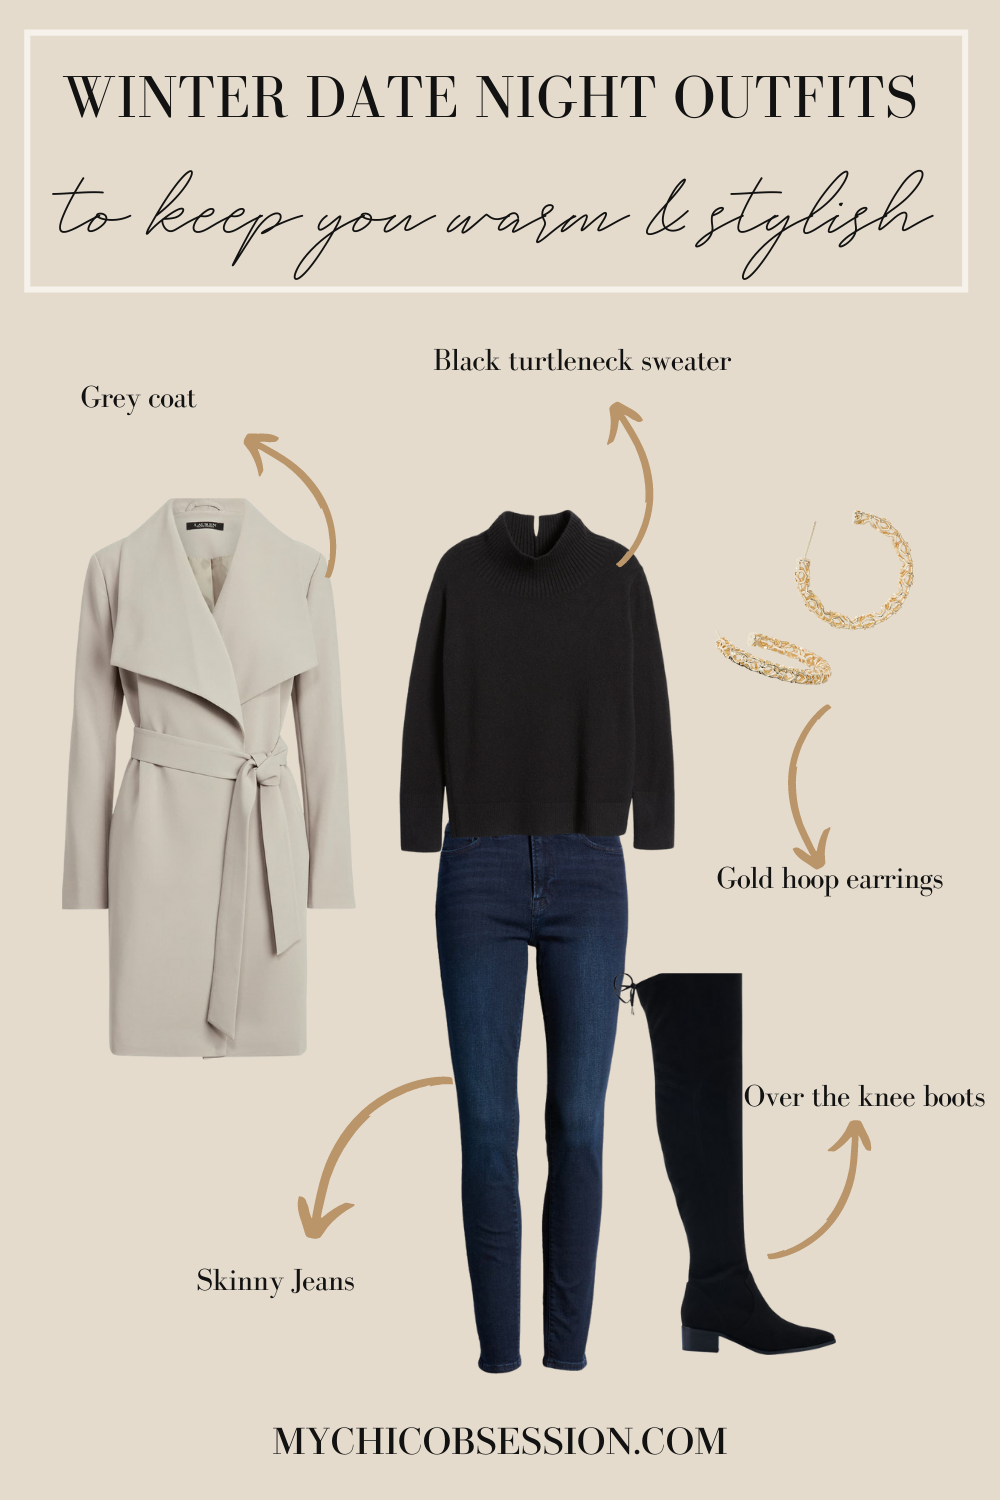 Winter date night look book with turtleneck sweater